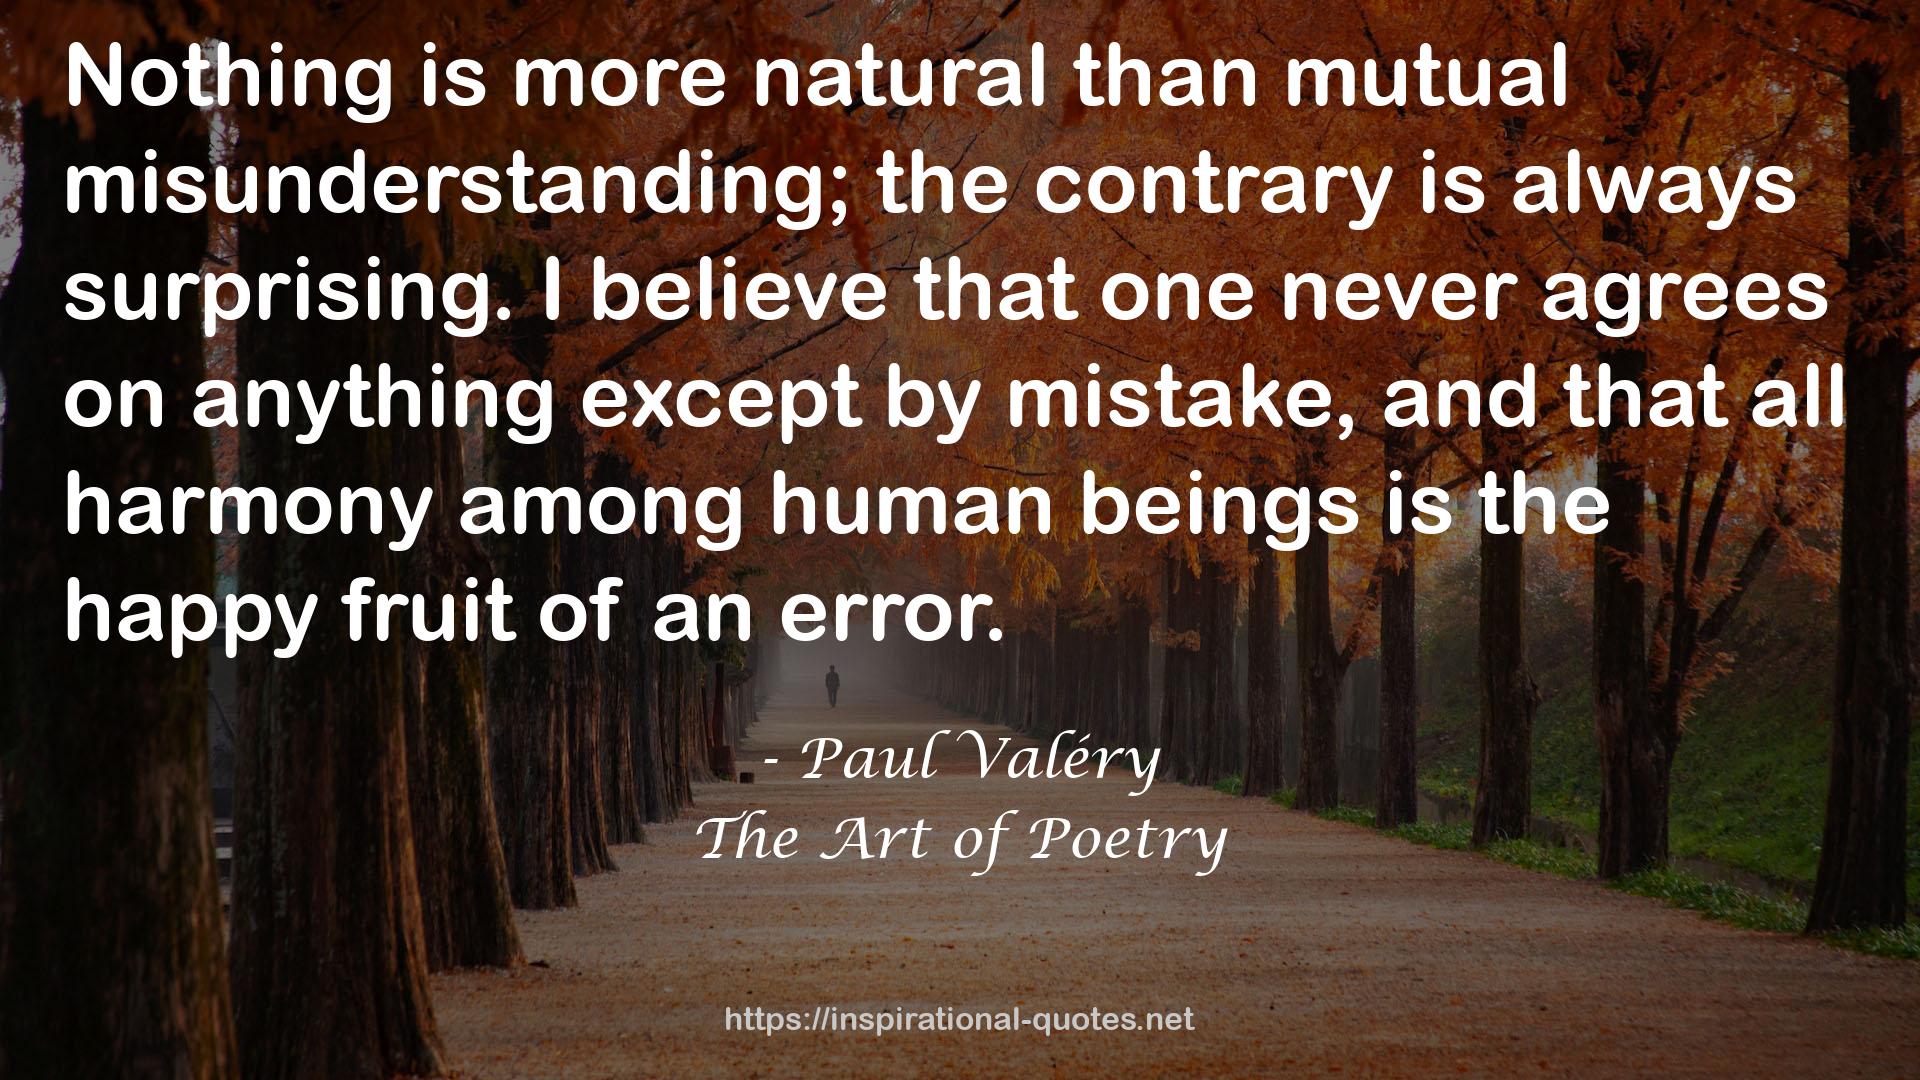 The Art of Poetry QUOTES